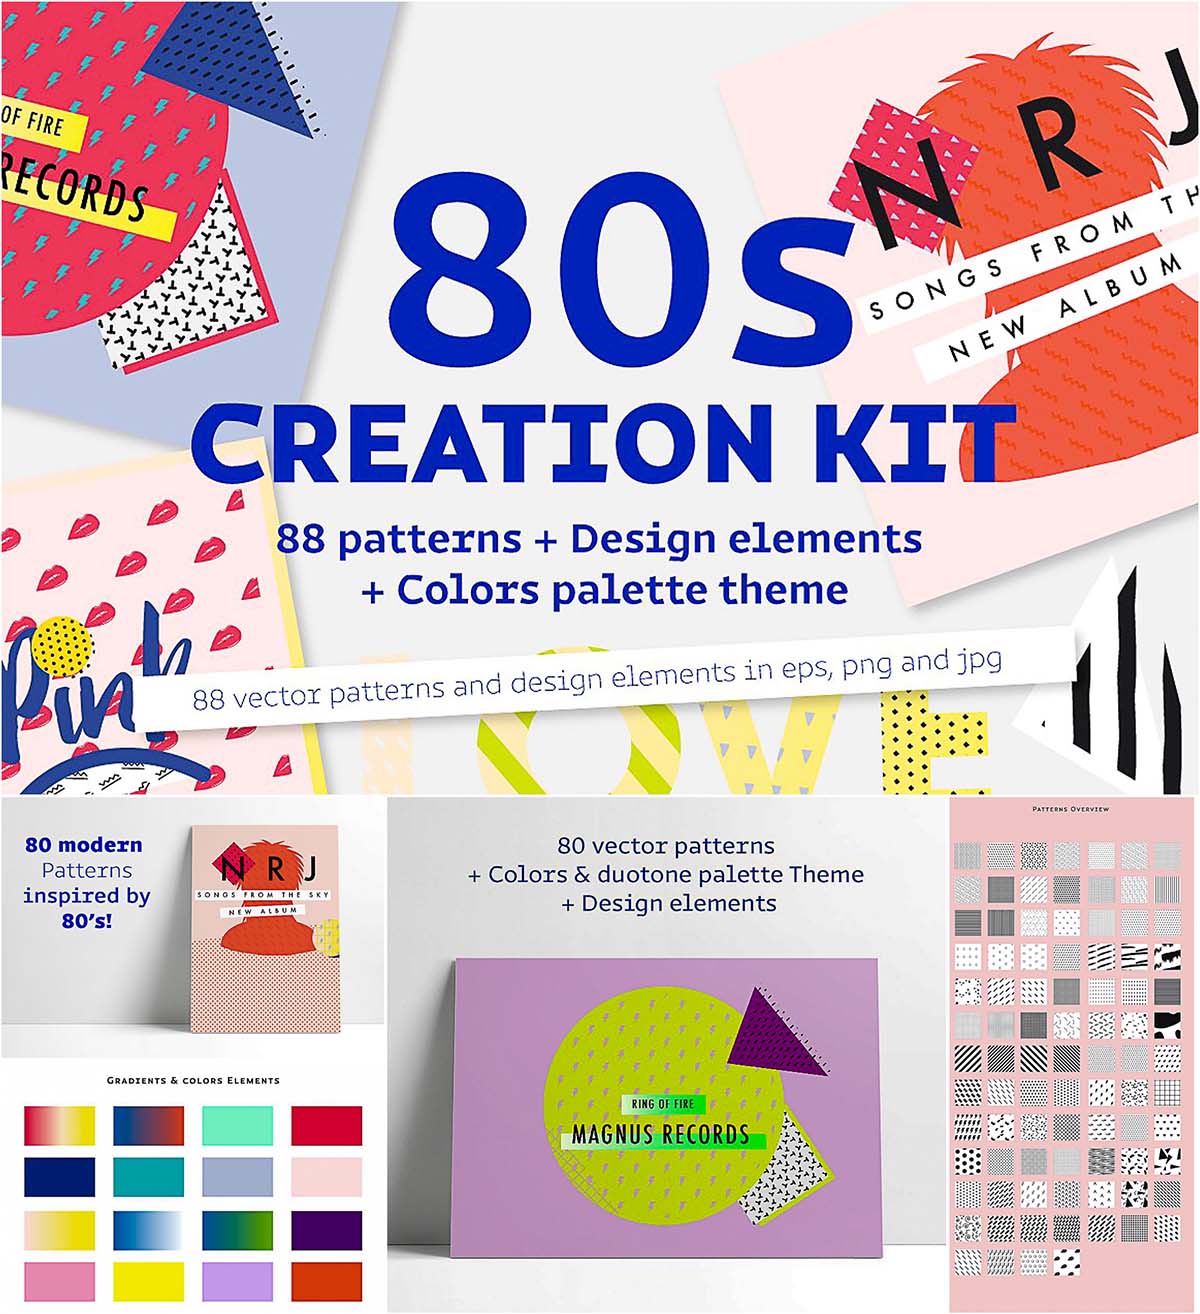 Eighties creation kit with patterns and elements